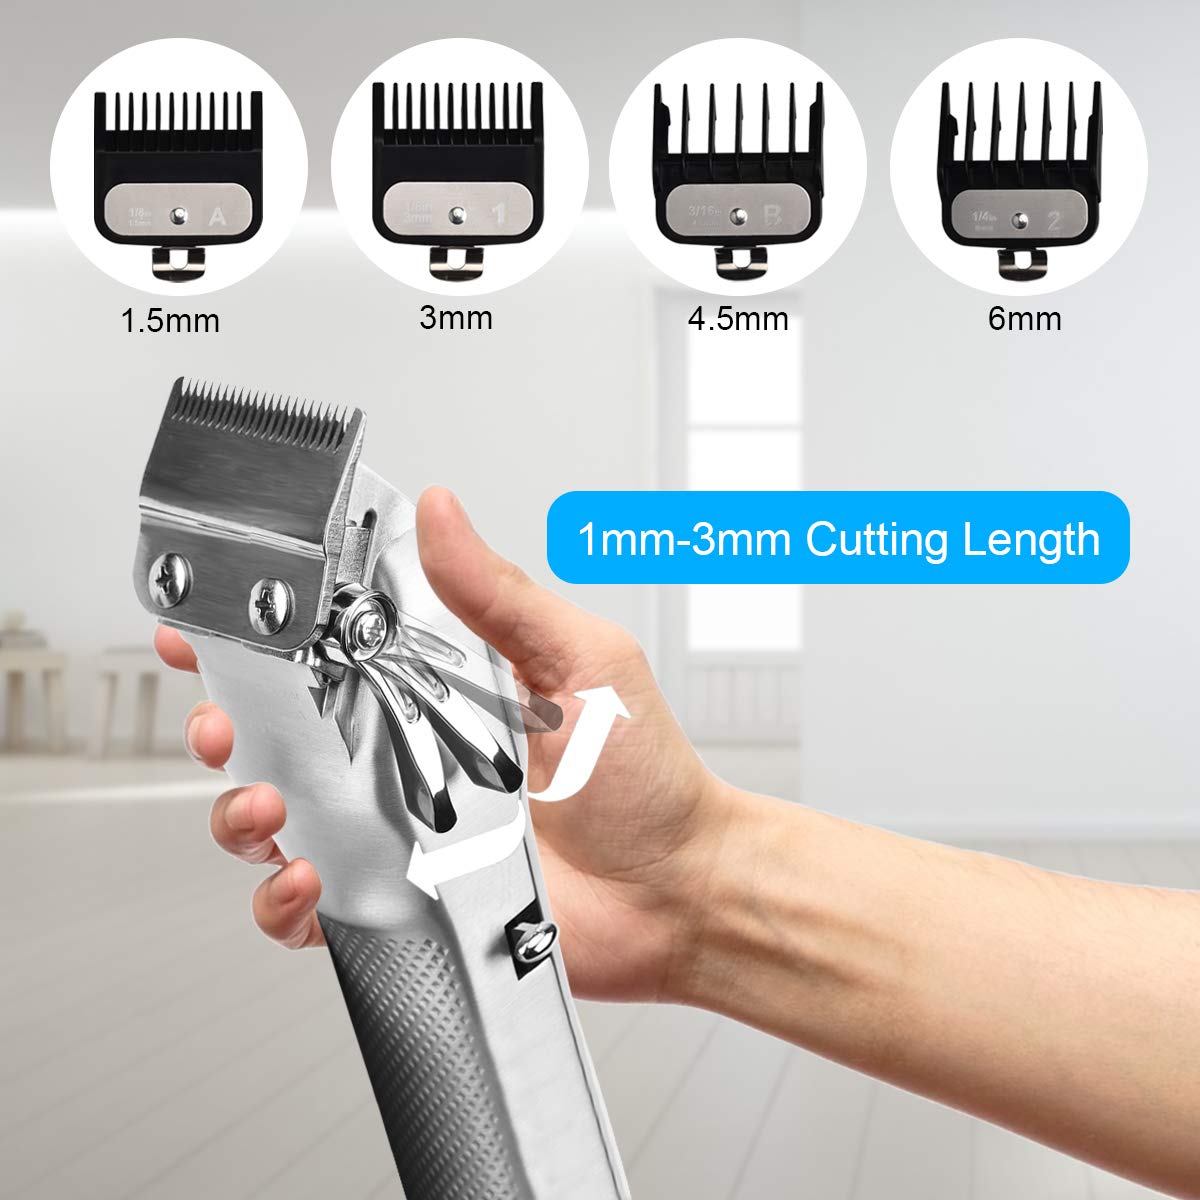 Pro Cordless Hair Clippers for Men Stylists Barbers Kids Home Using - 3